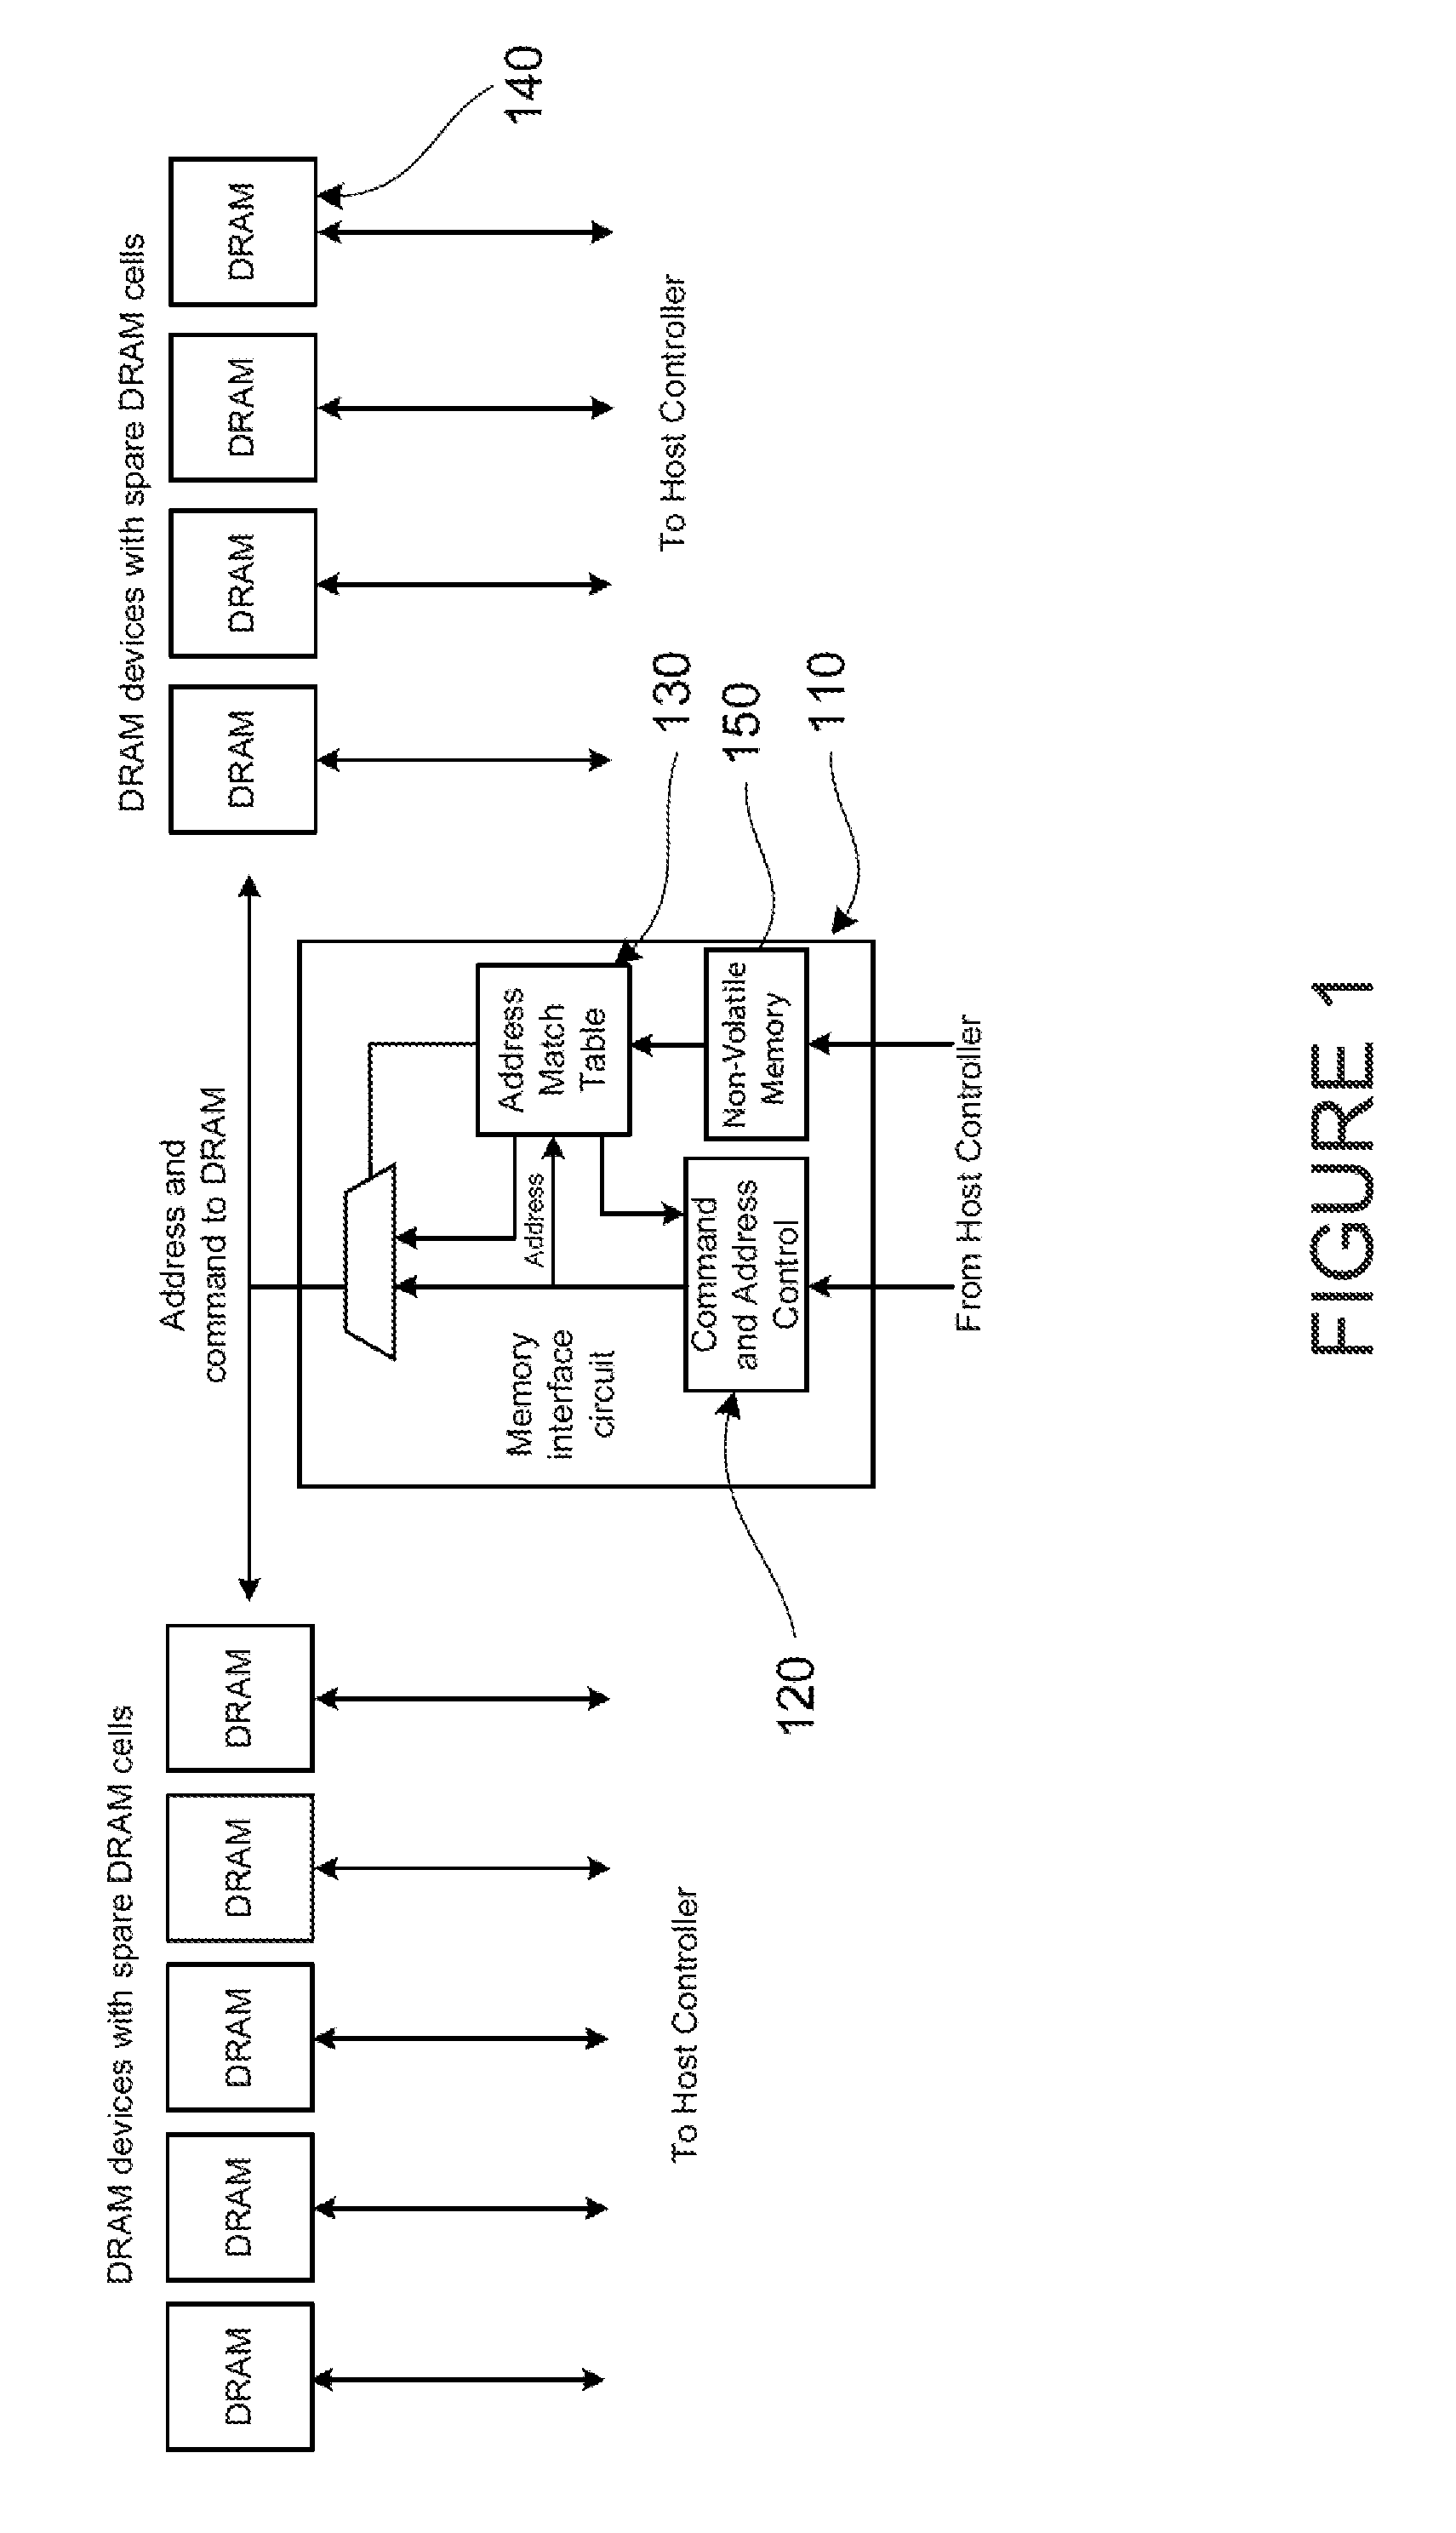 Compression of content entries in storage for replacing faulty memory cells